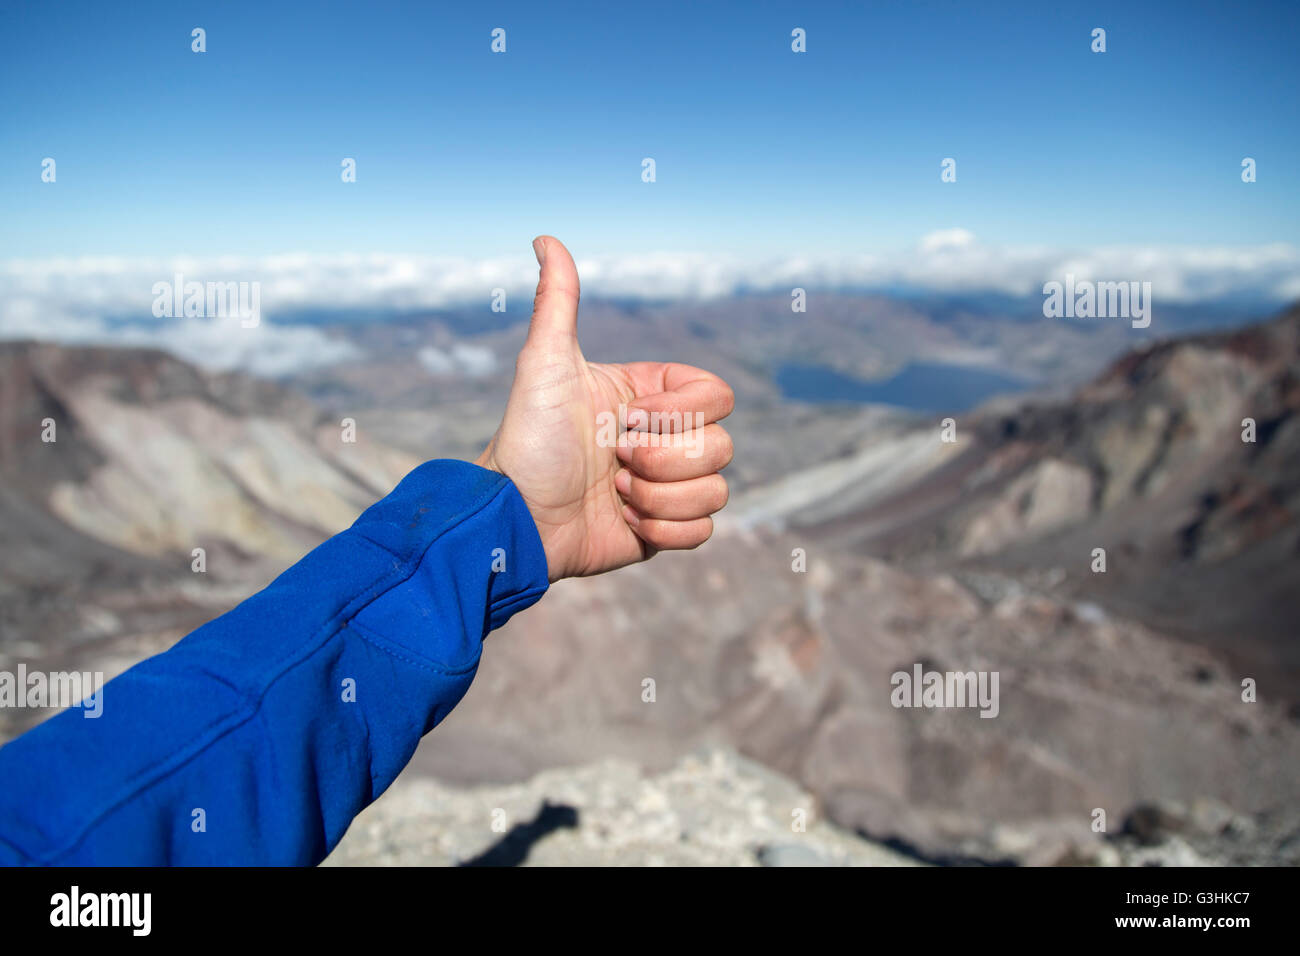 Young woman at mountain top, gesturing thumbs up, focus on hand, Mt. St. Helens, Oregon, USA Stock Photo